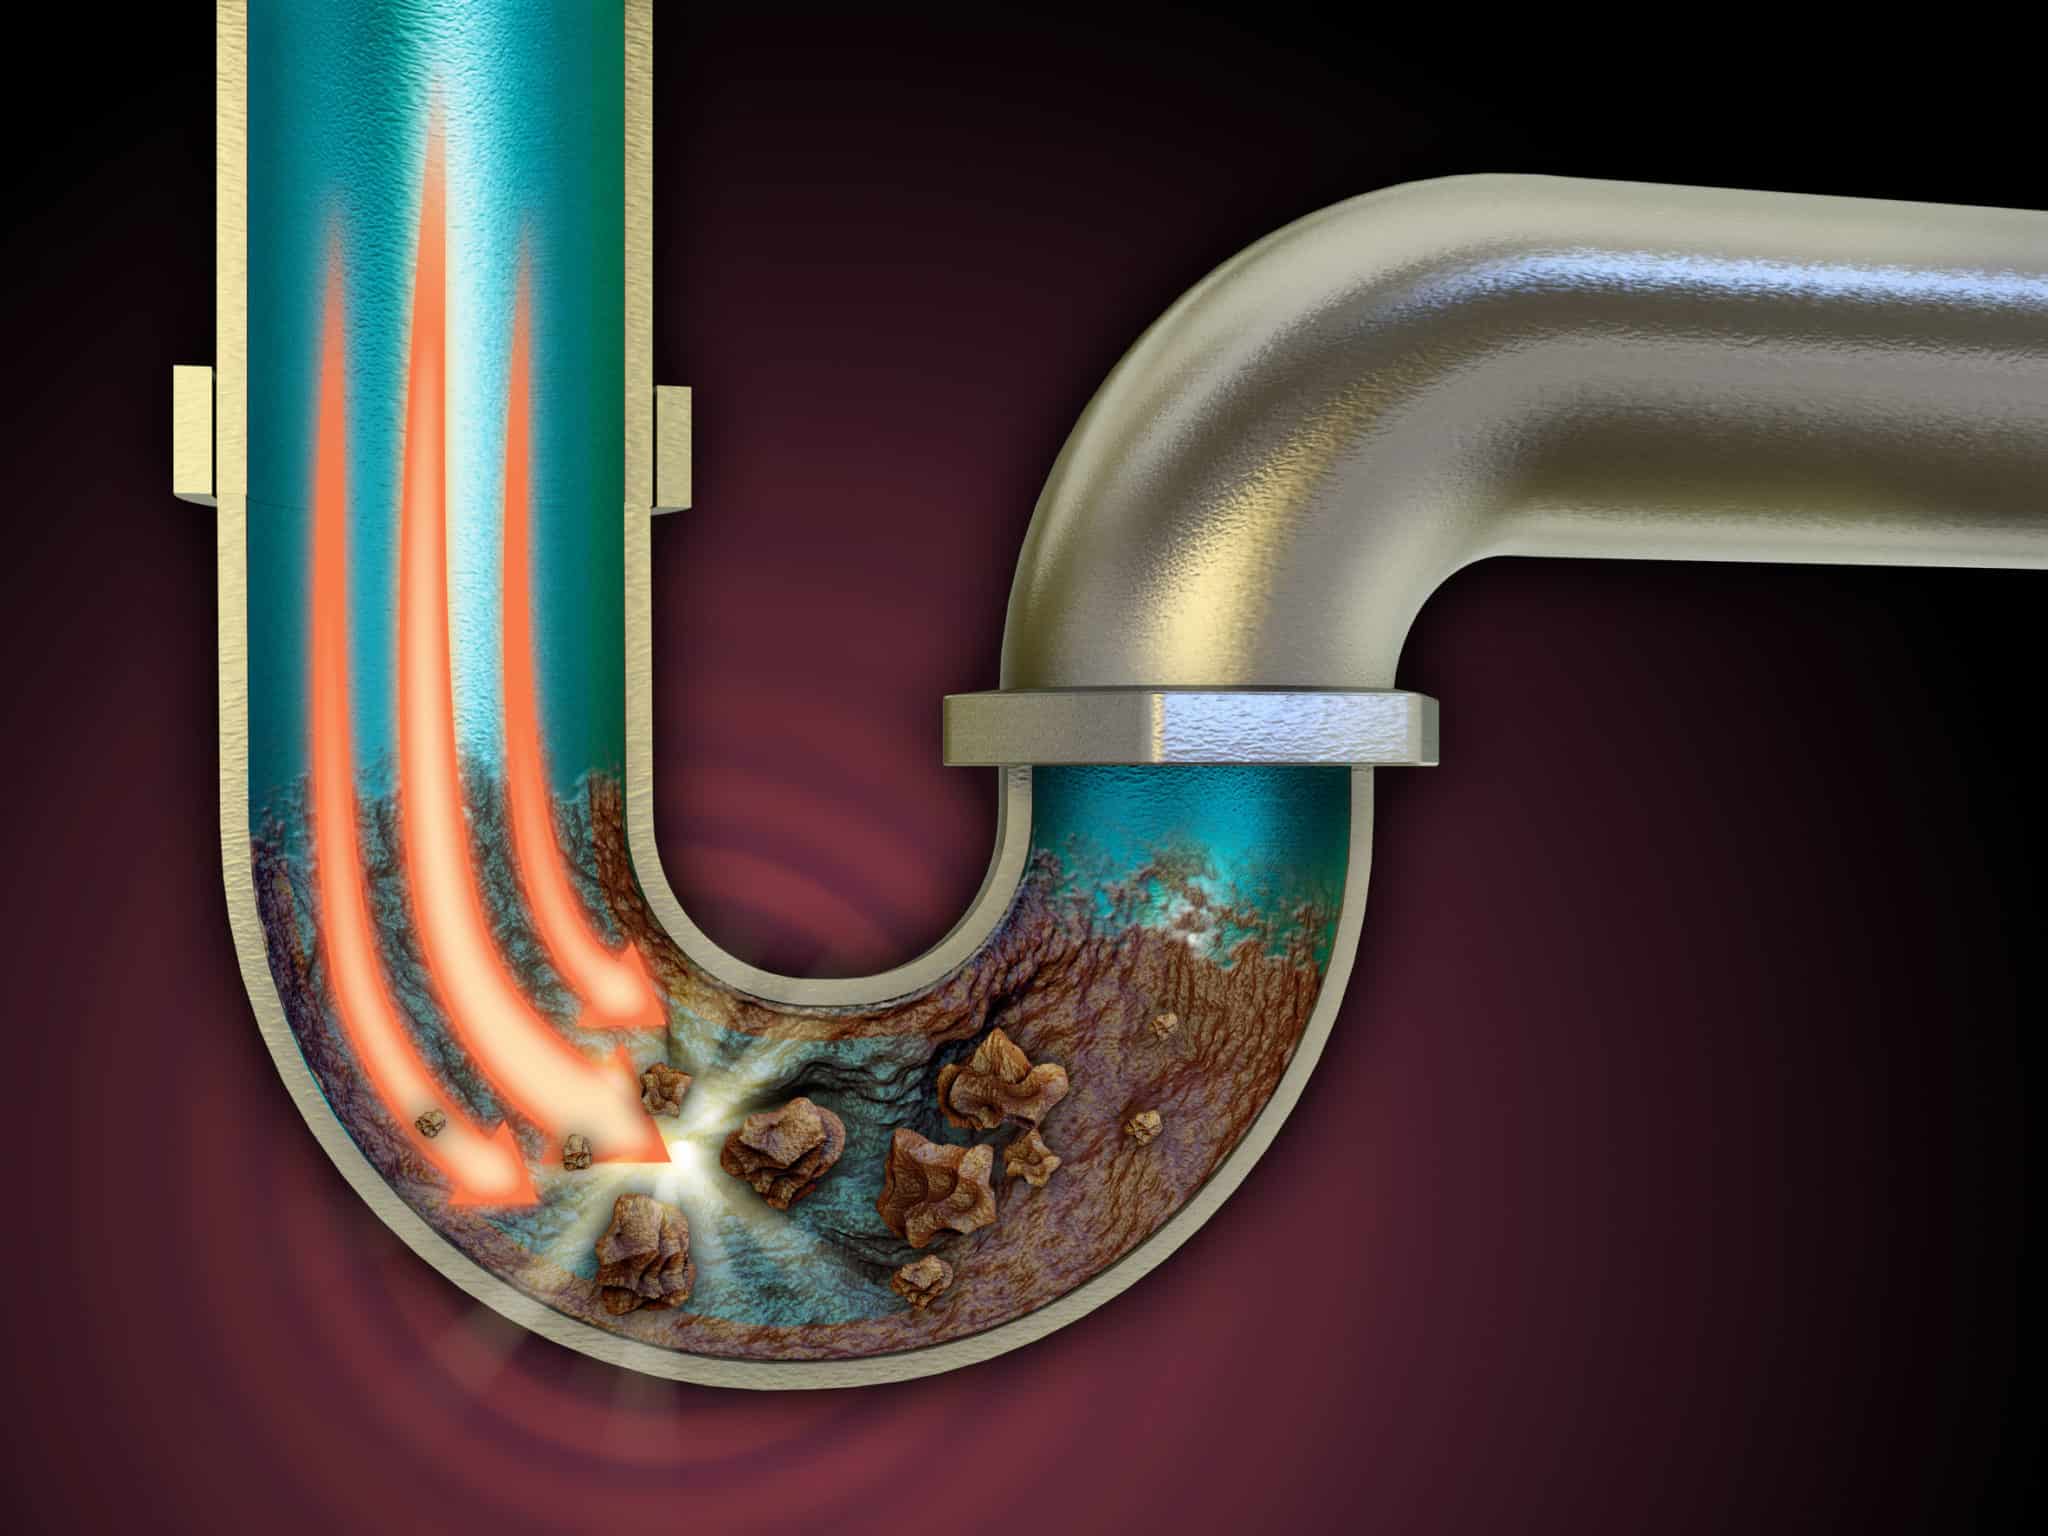 Plumber drain cleaning with a plumbing snake